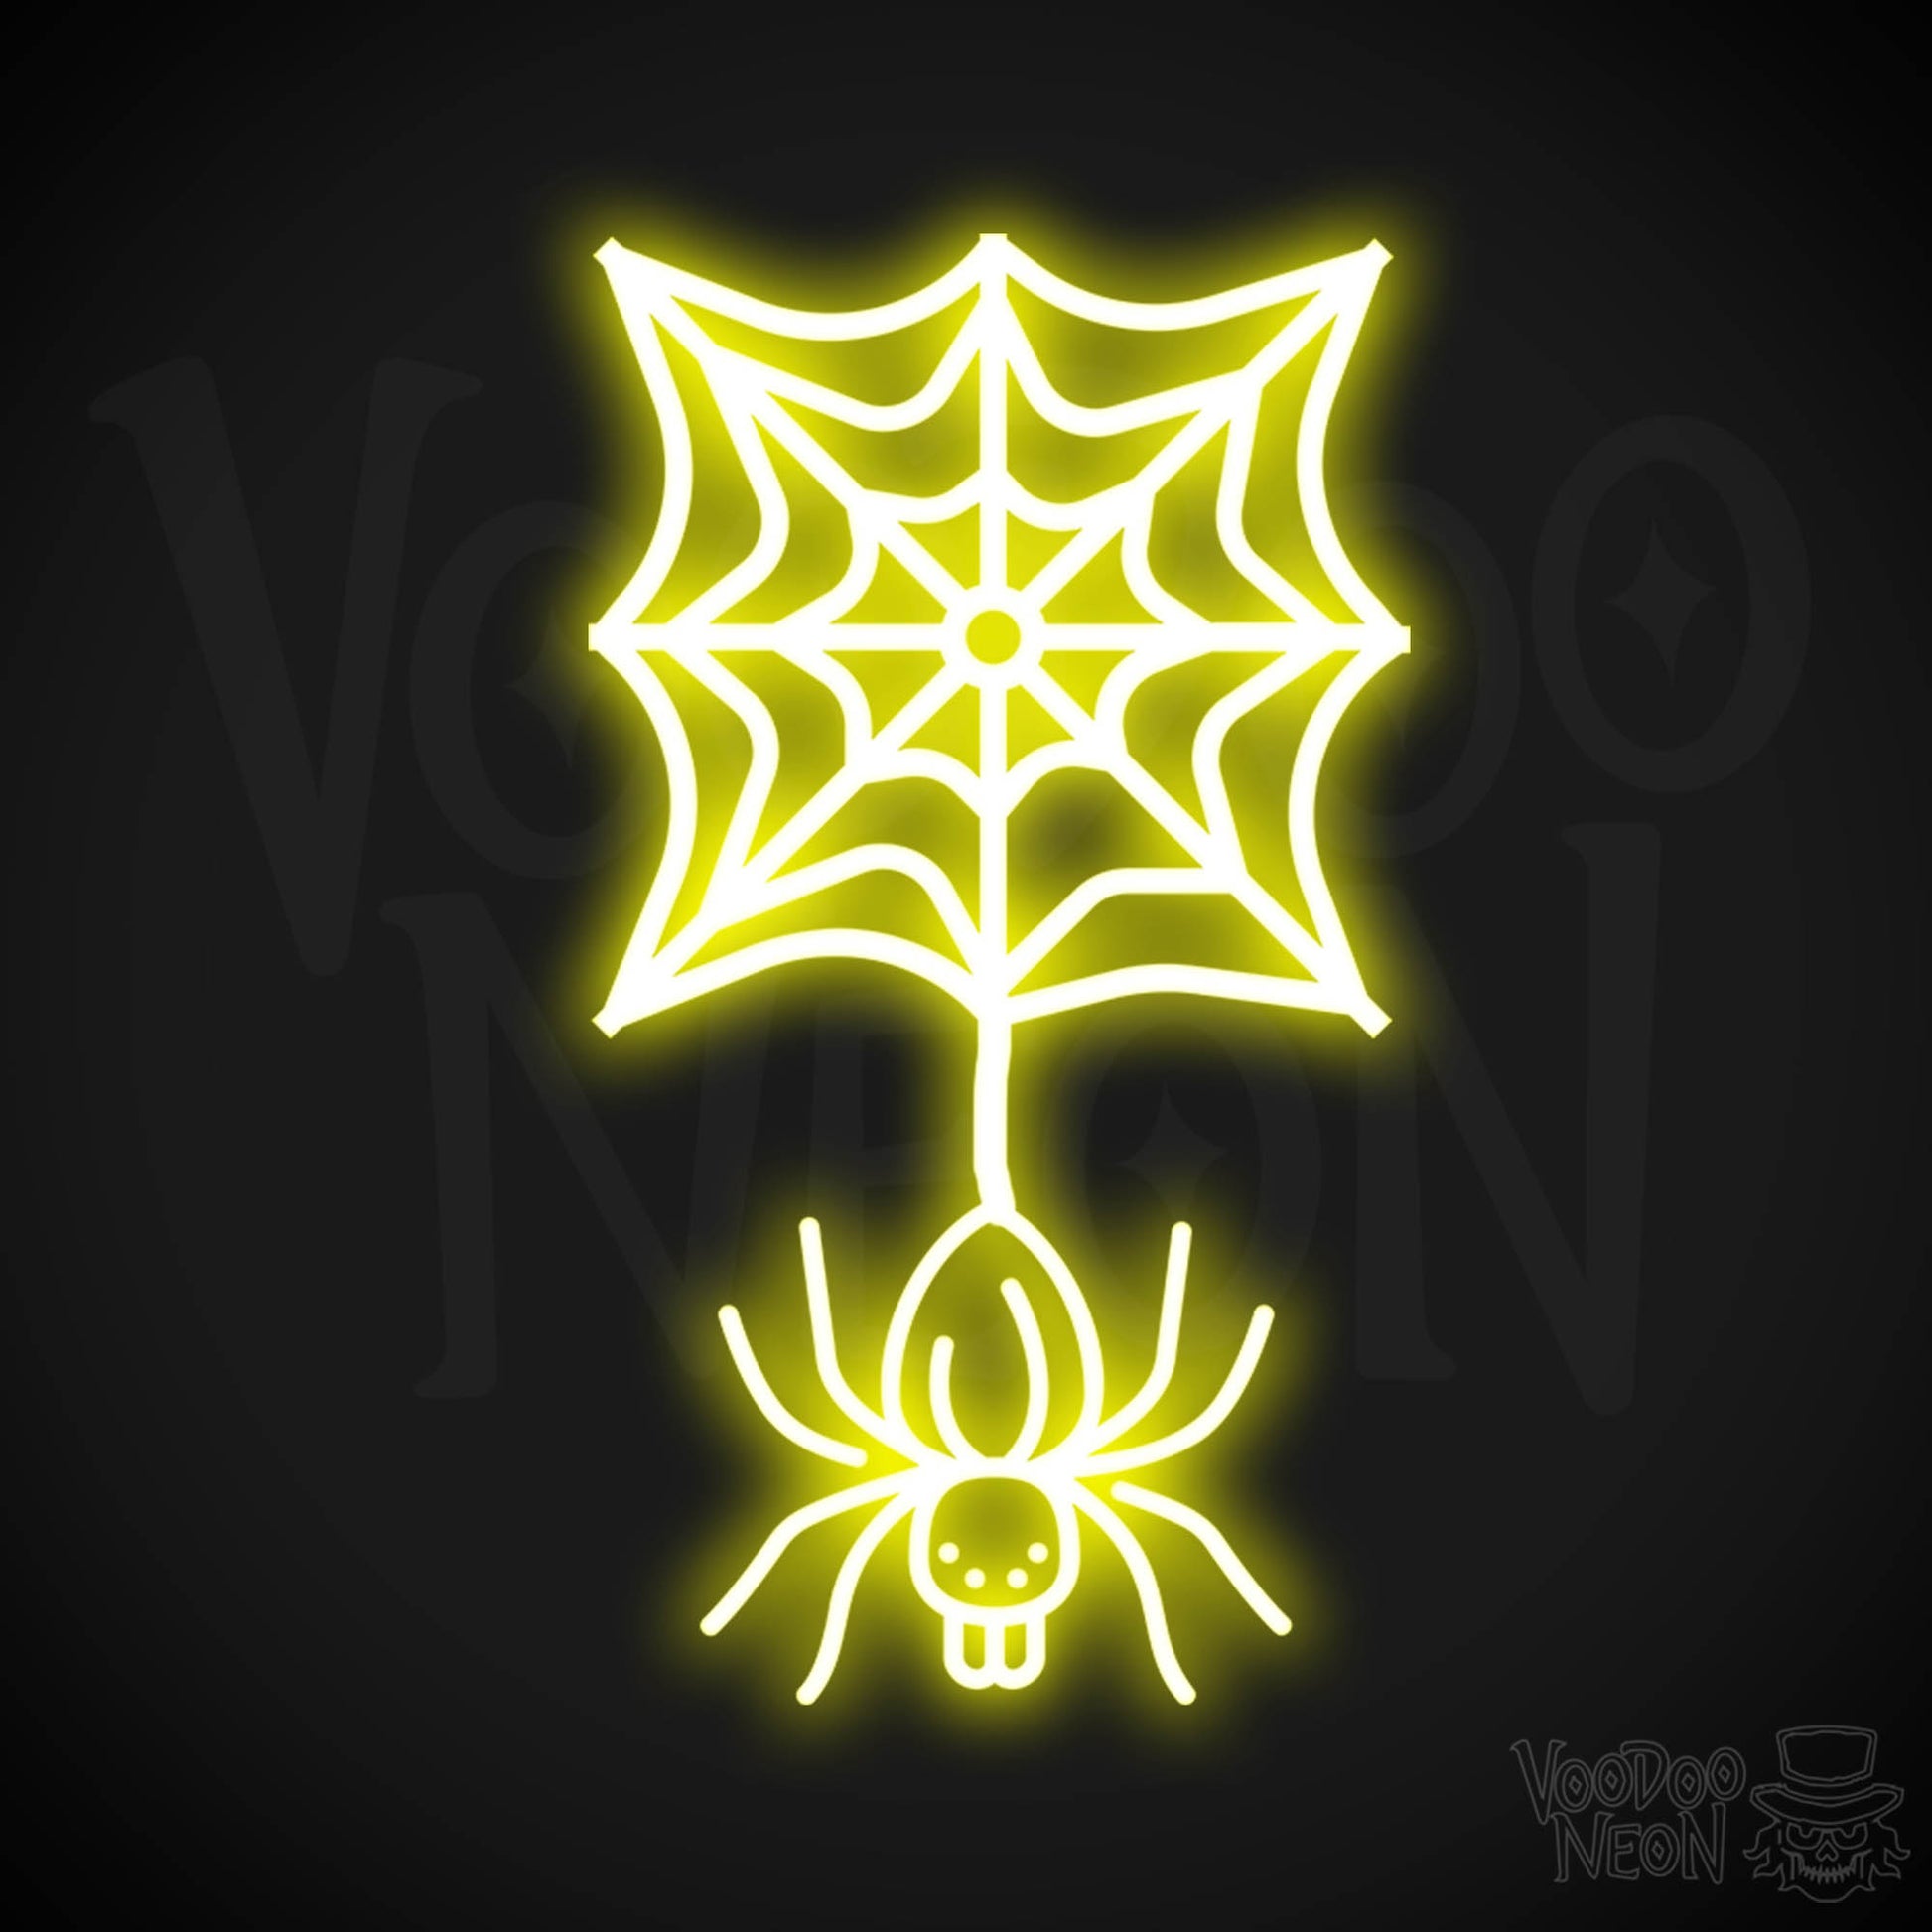 Neon Spider - Spider Neon Sign - Halloween LED Neon Spider - Color Yellow